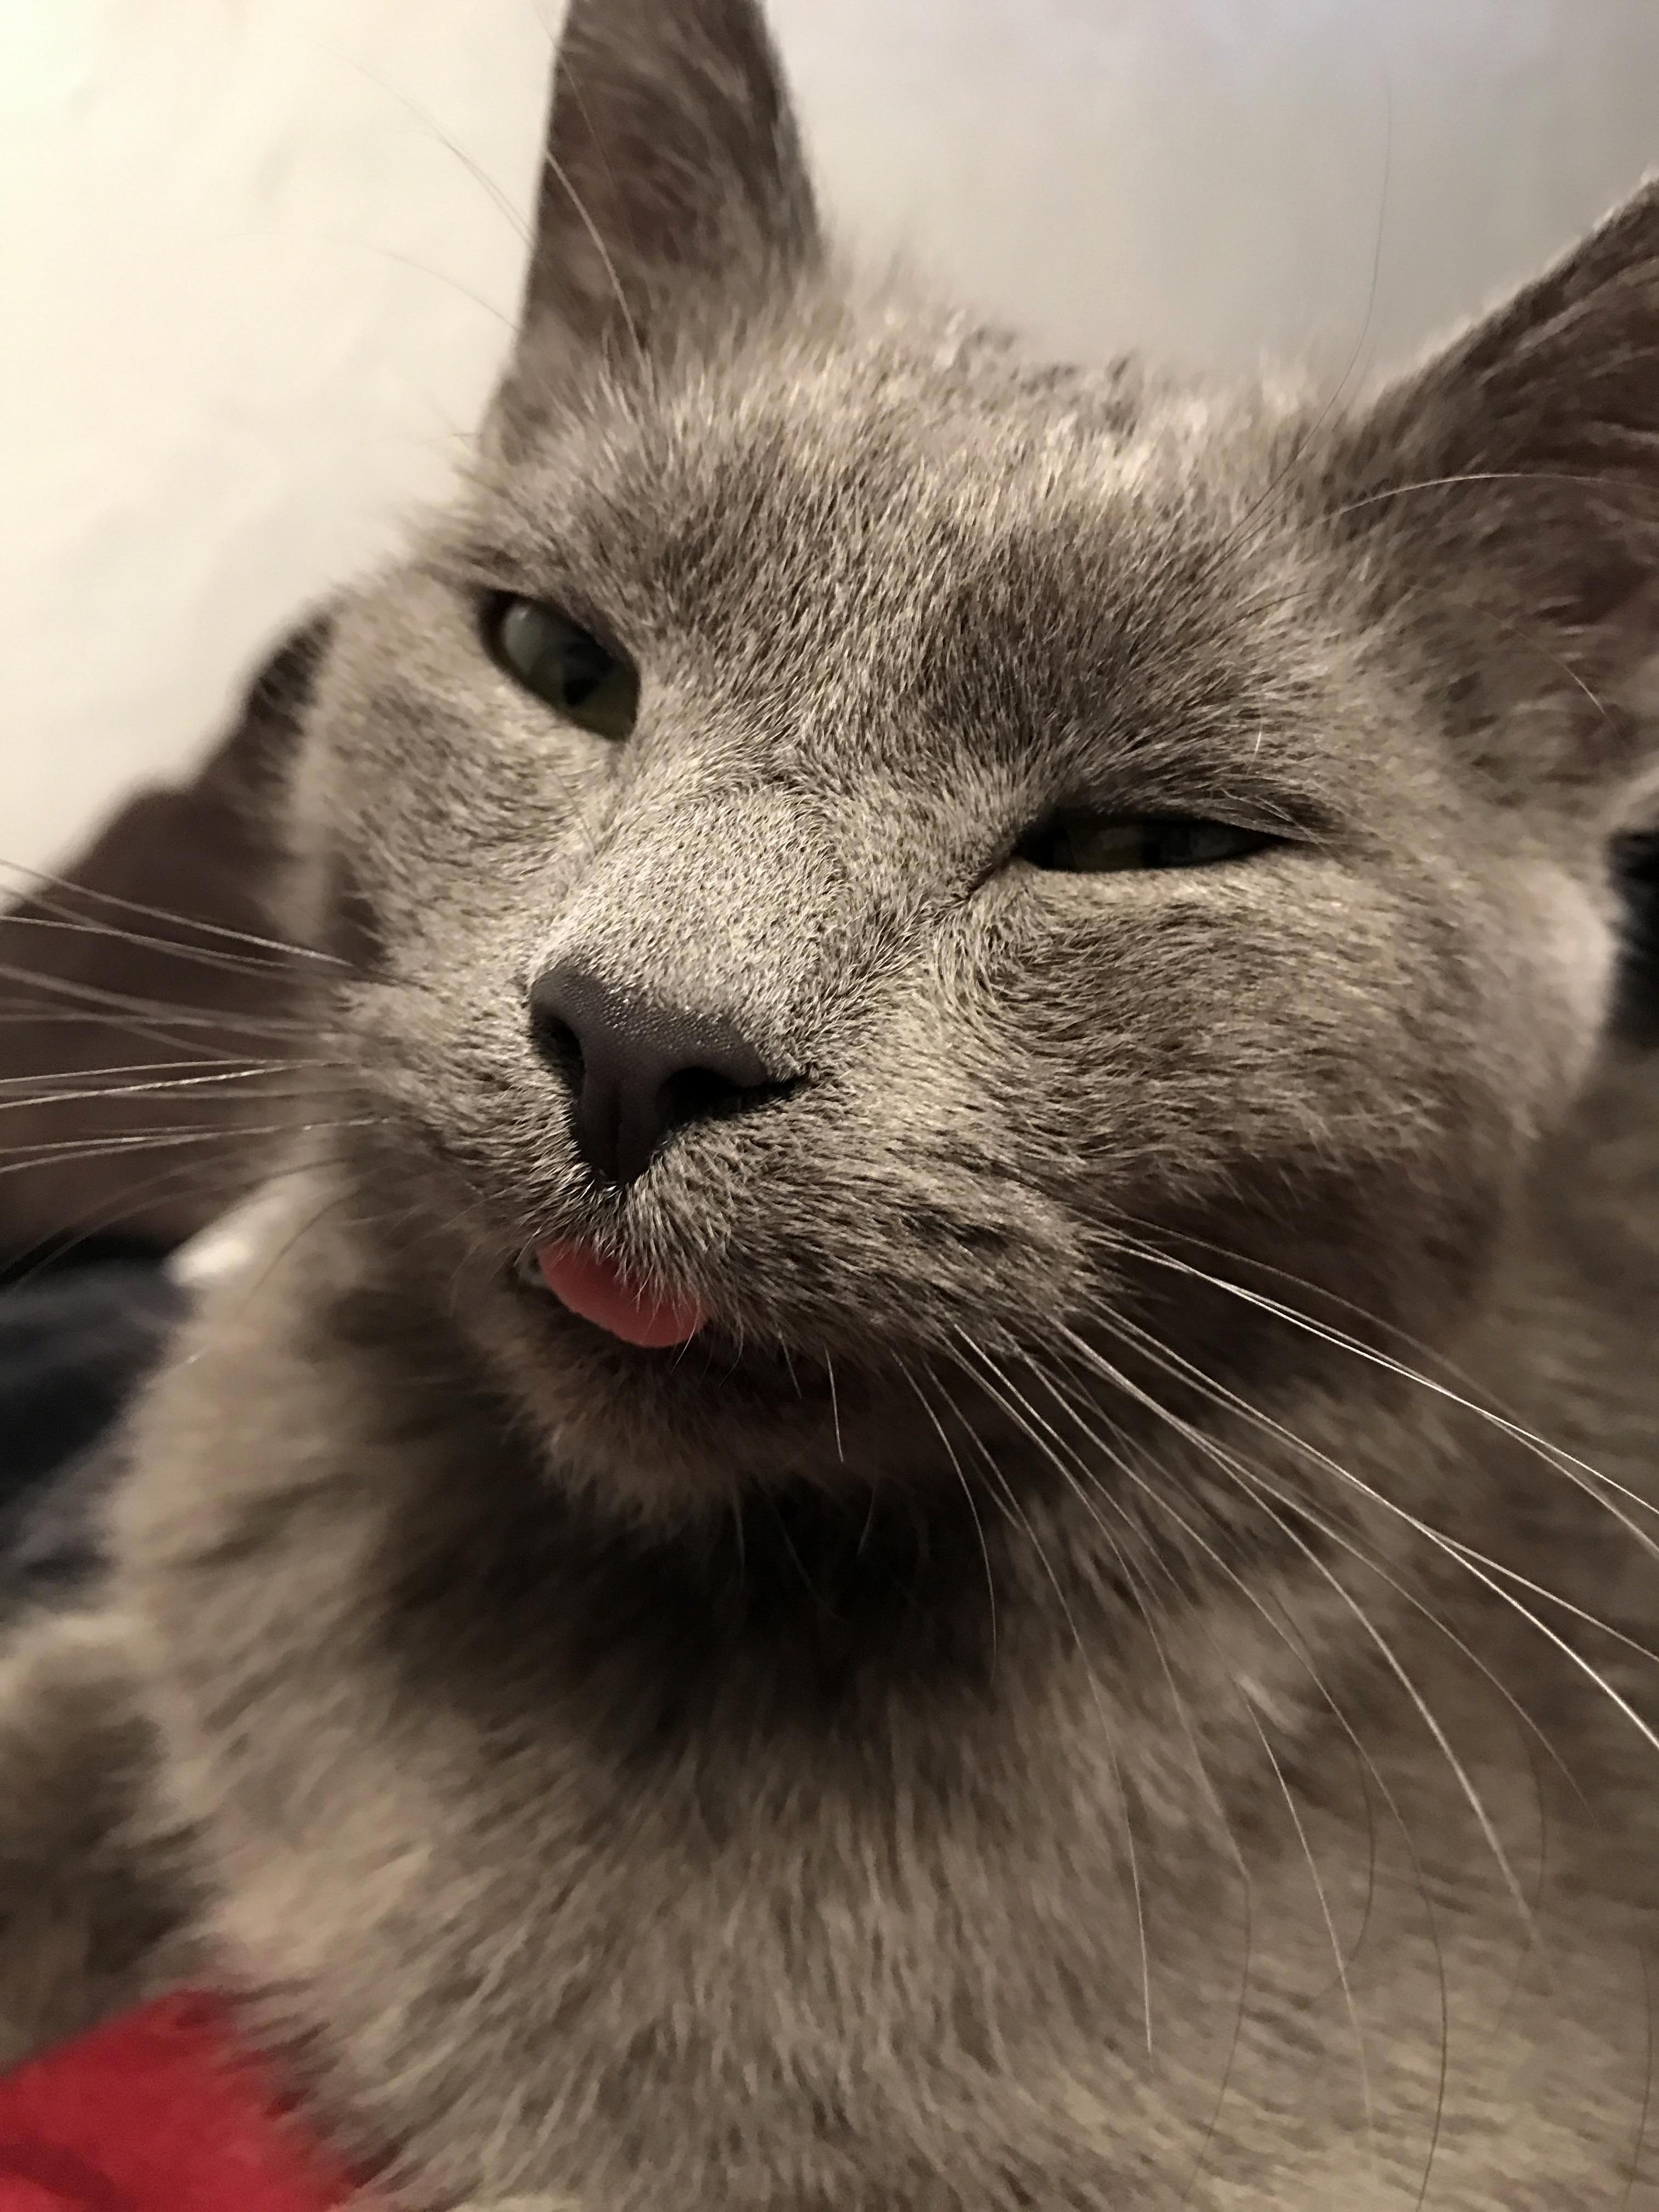 Soft and grey with a side of blep